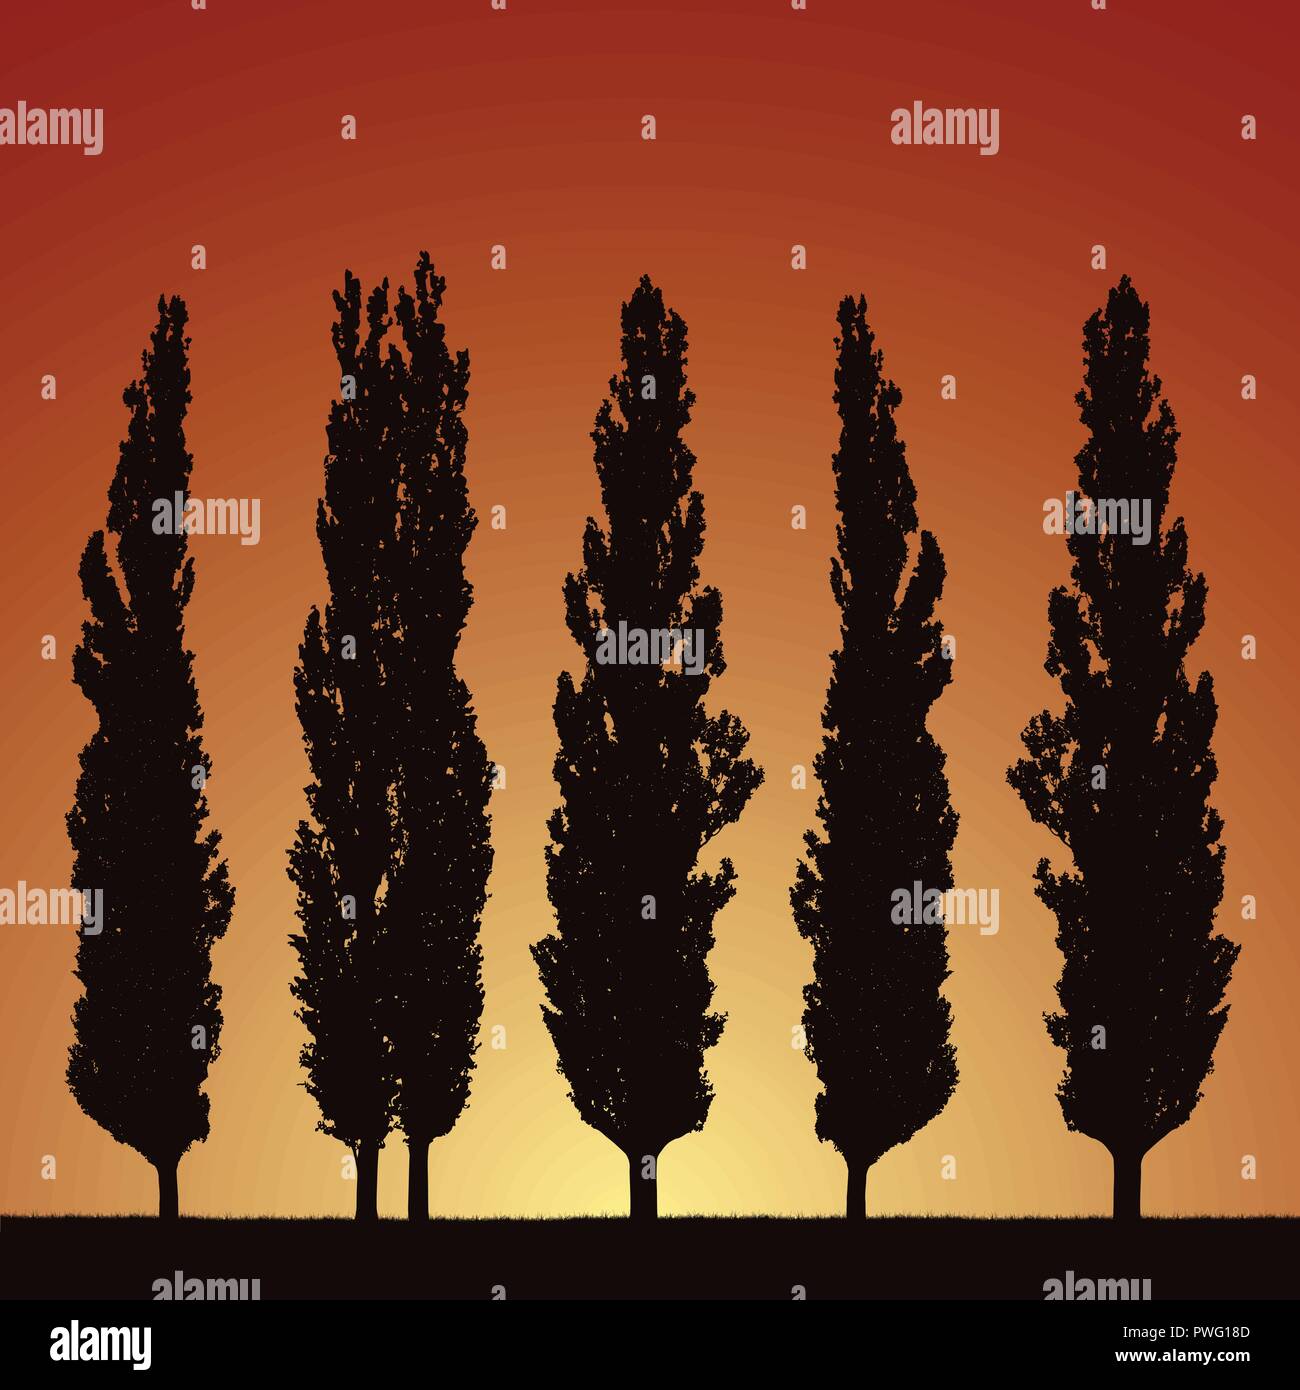 Realistic illustration of silhouettes of five trees - poplars, grass and rising or setting sun on morning or evening orange sky - vector Stock Vector